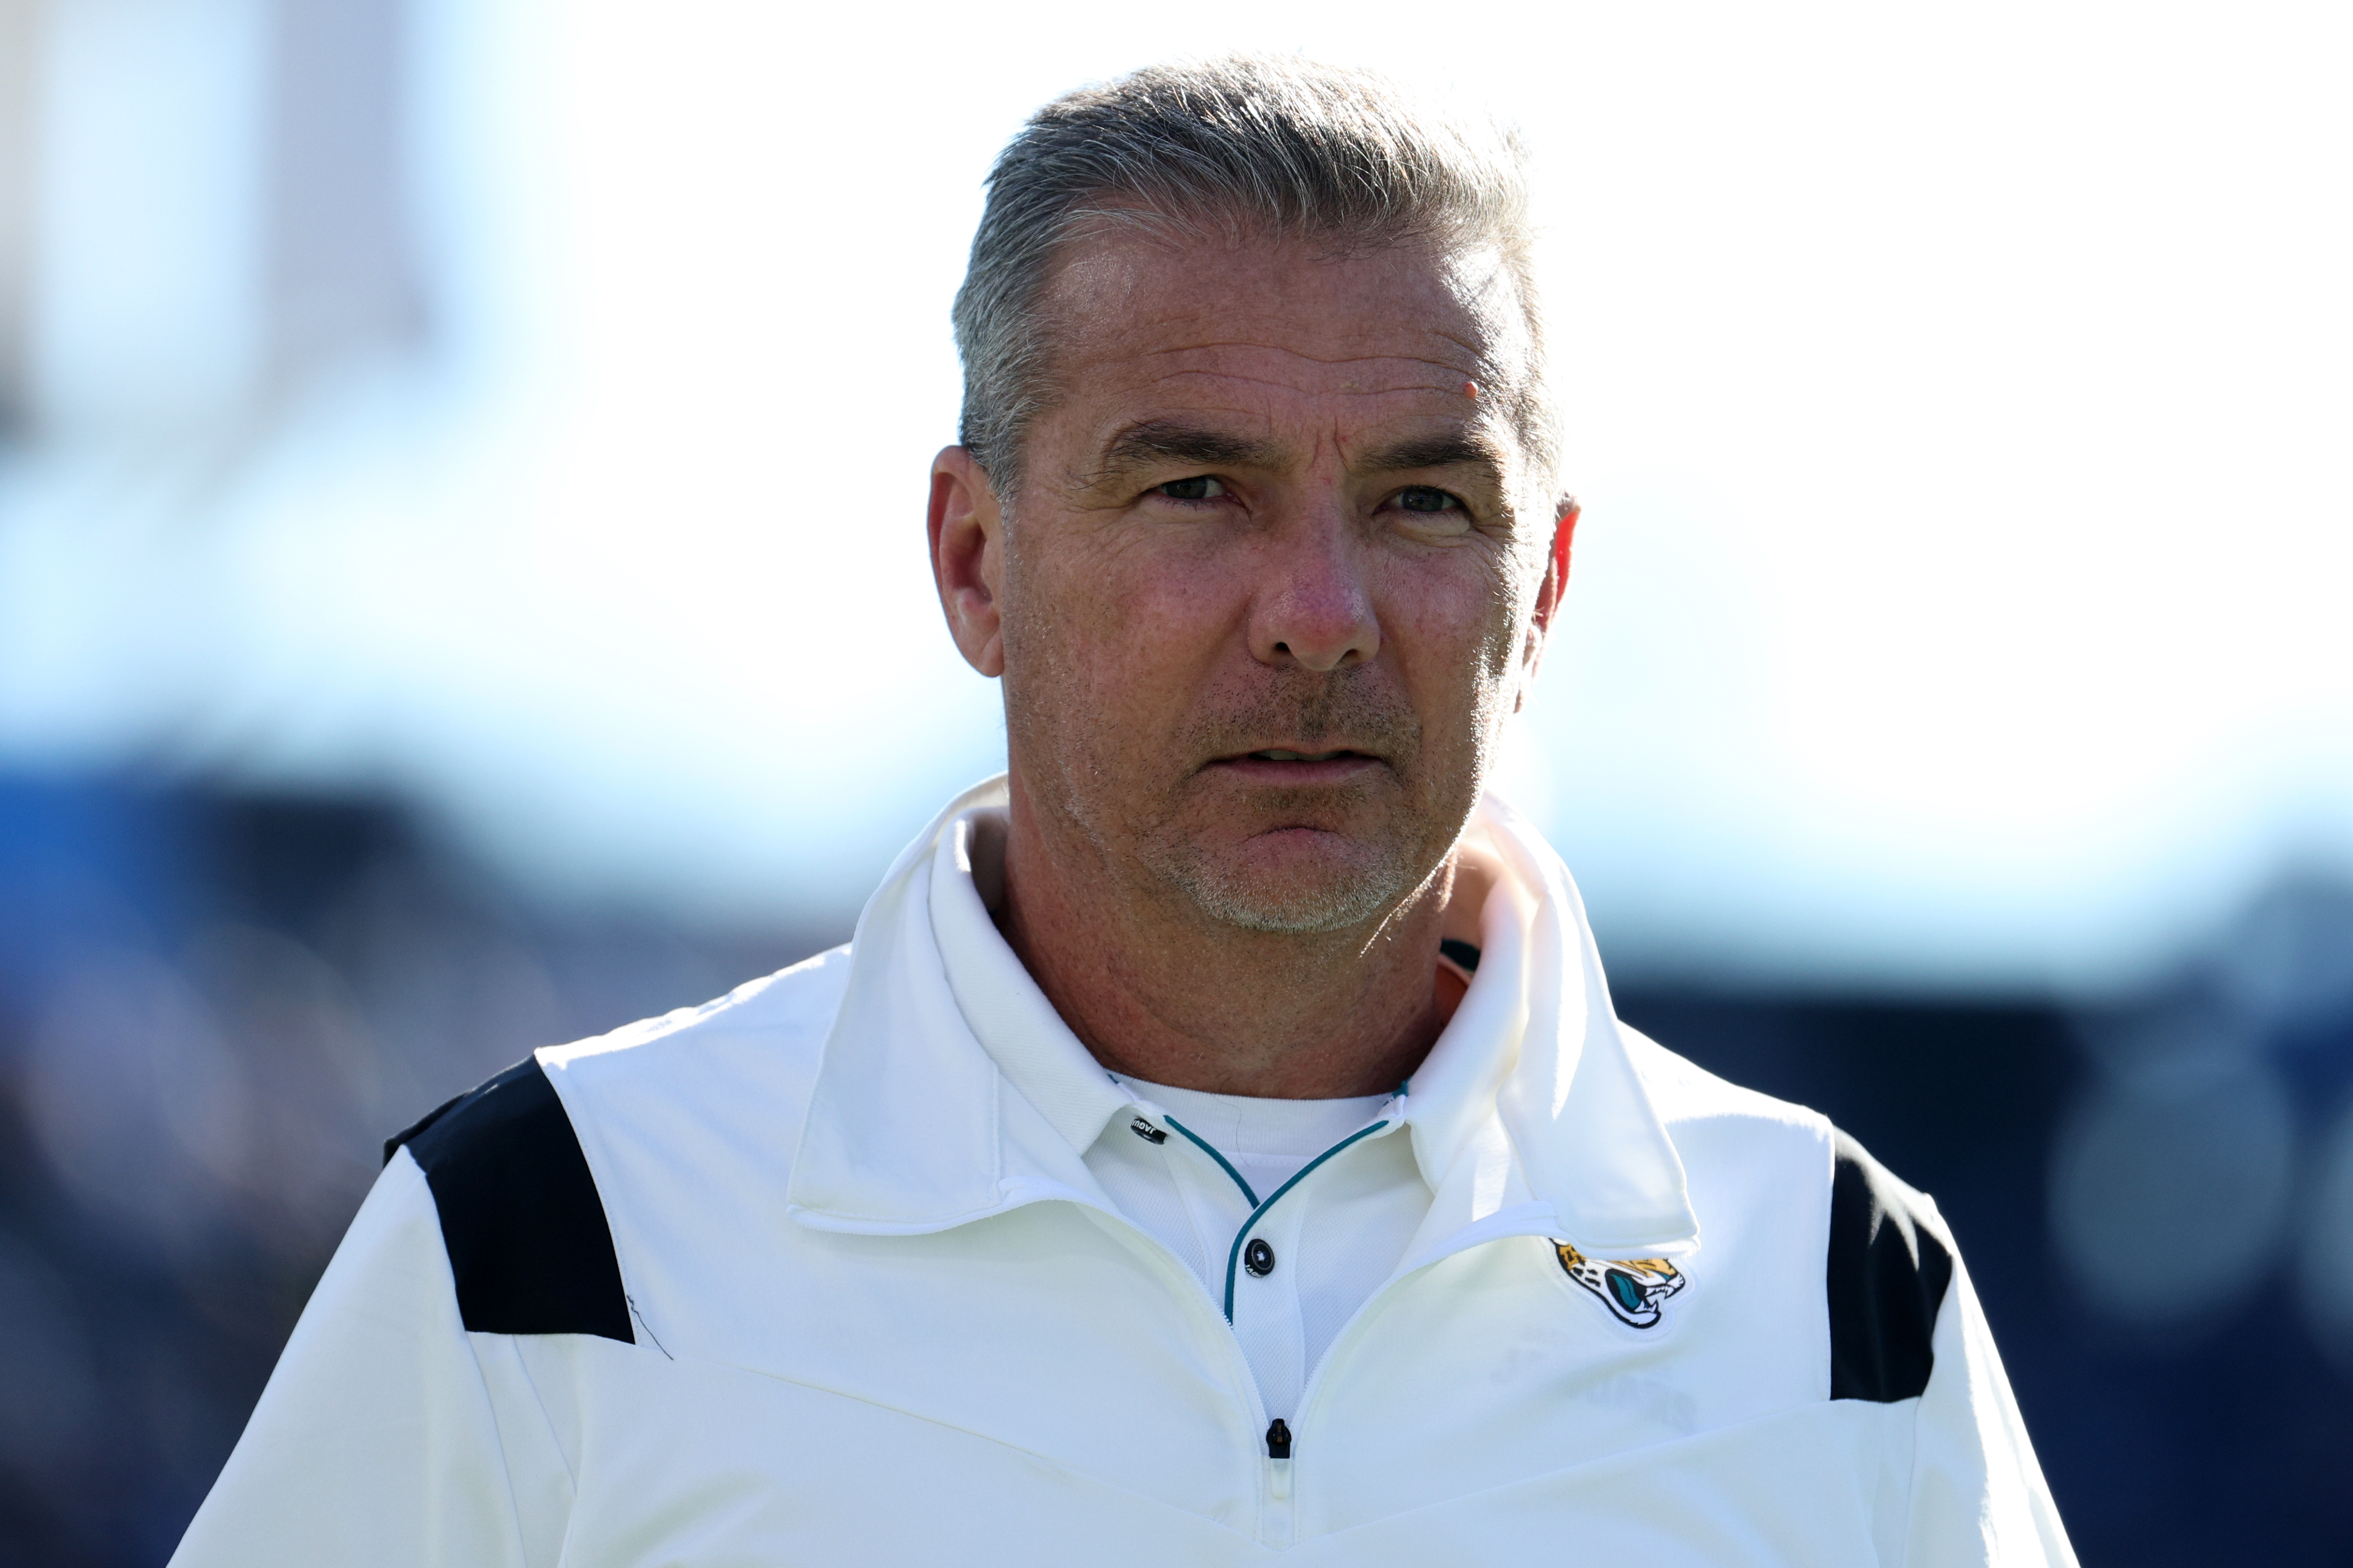 Jaguars head coach Urban Meyer looks on during game against the Titans